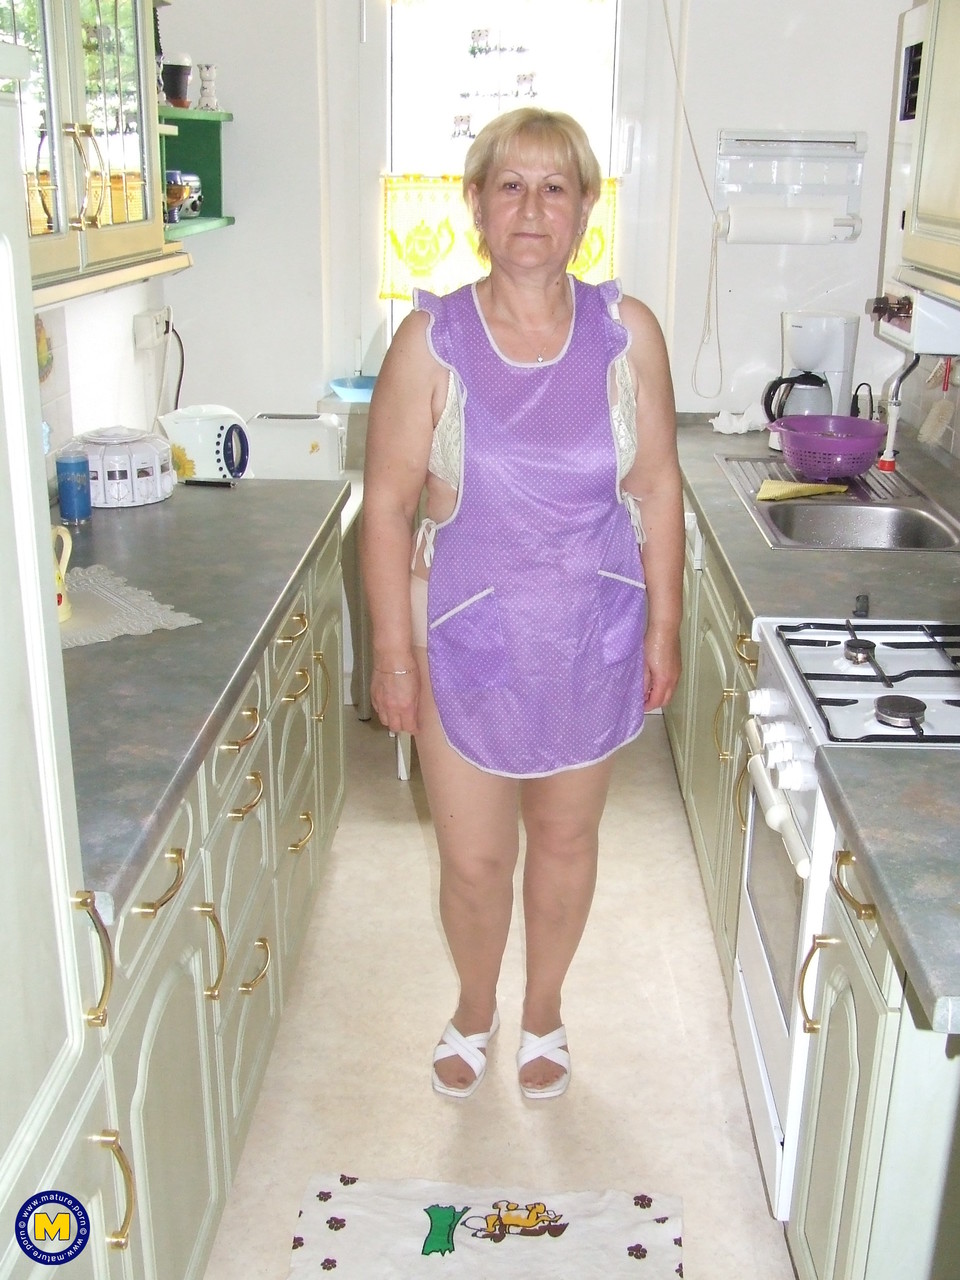 Short haired German cleaning lady Dagmar shows her mature cunt in the kitchen porno foto #425226956 | Mature NL Pics, Dagmar, German, mobiele porno